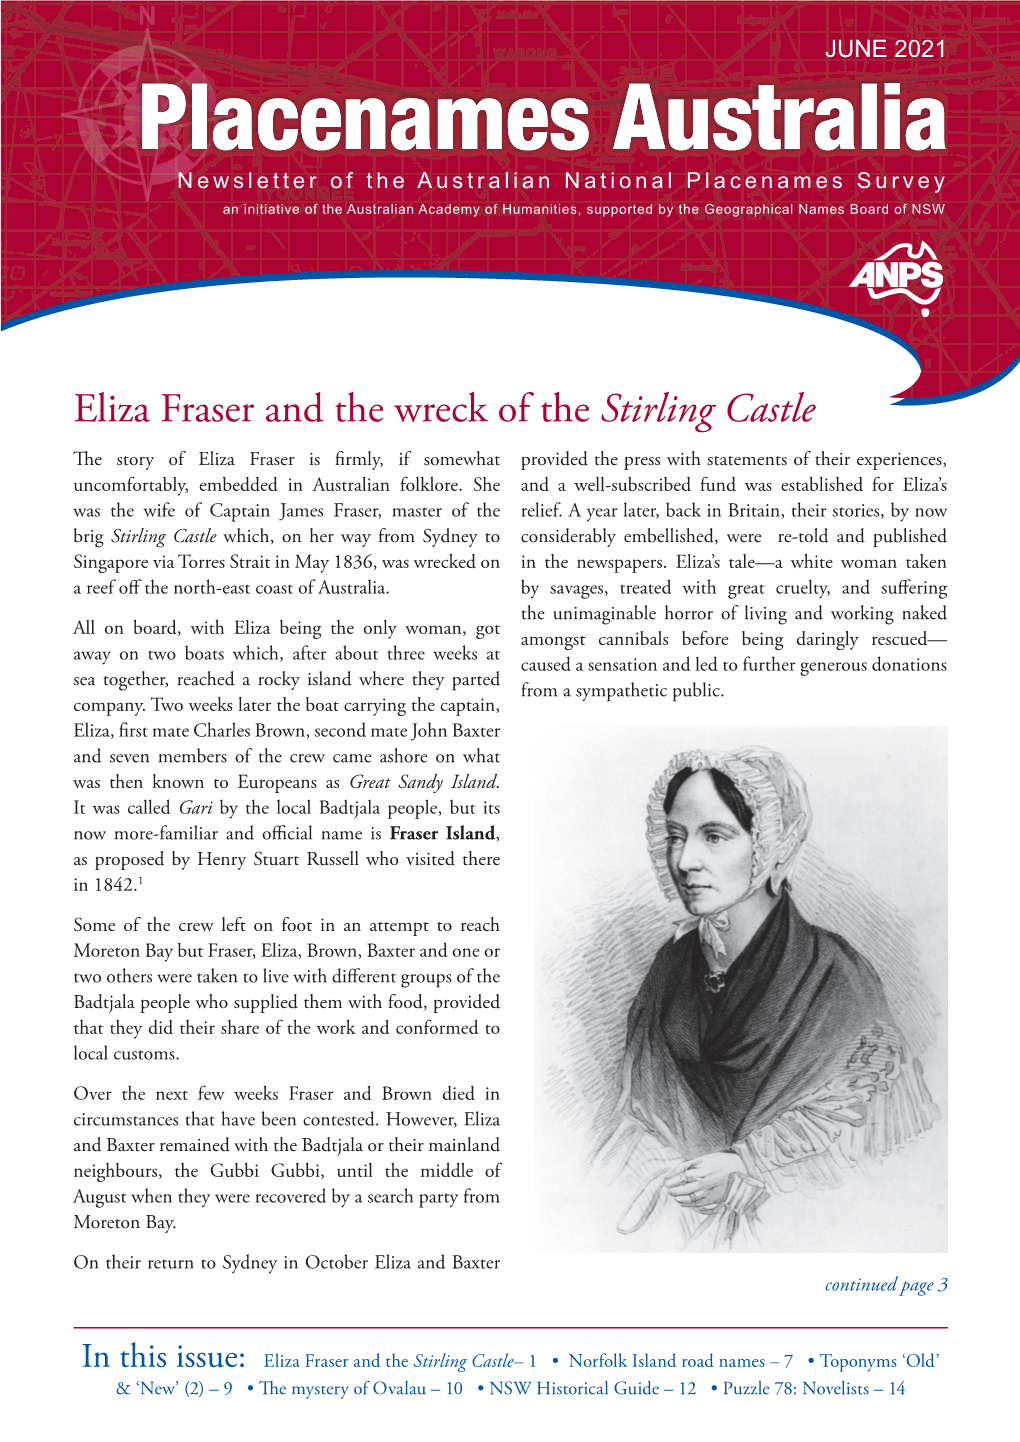 Eliza Fraser and the Wreck of the Stirling Castle